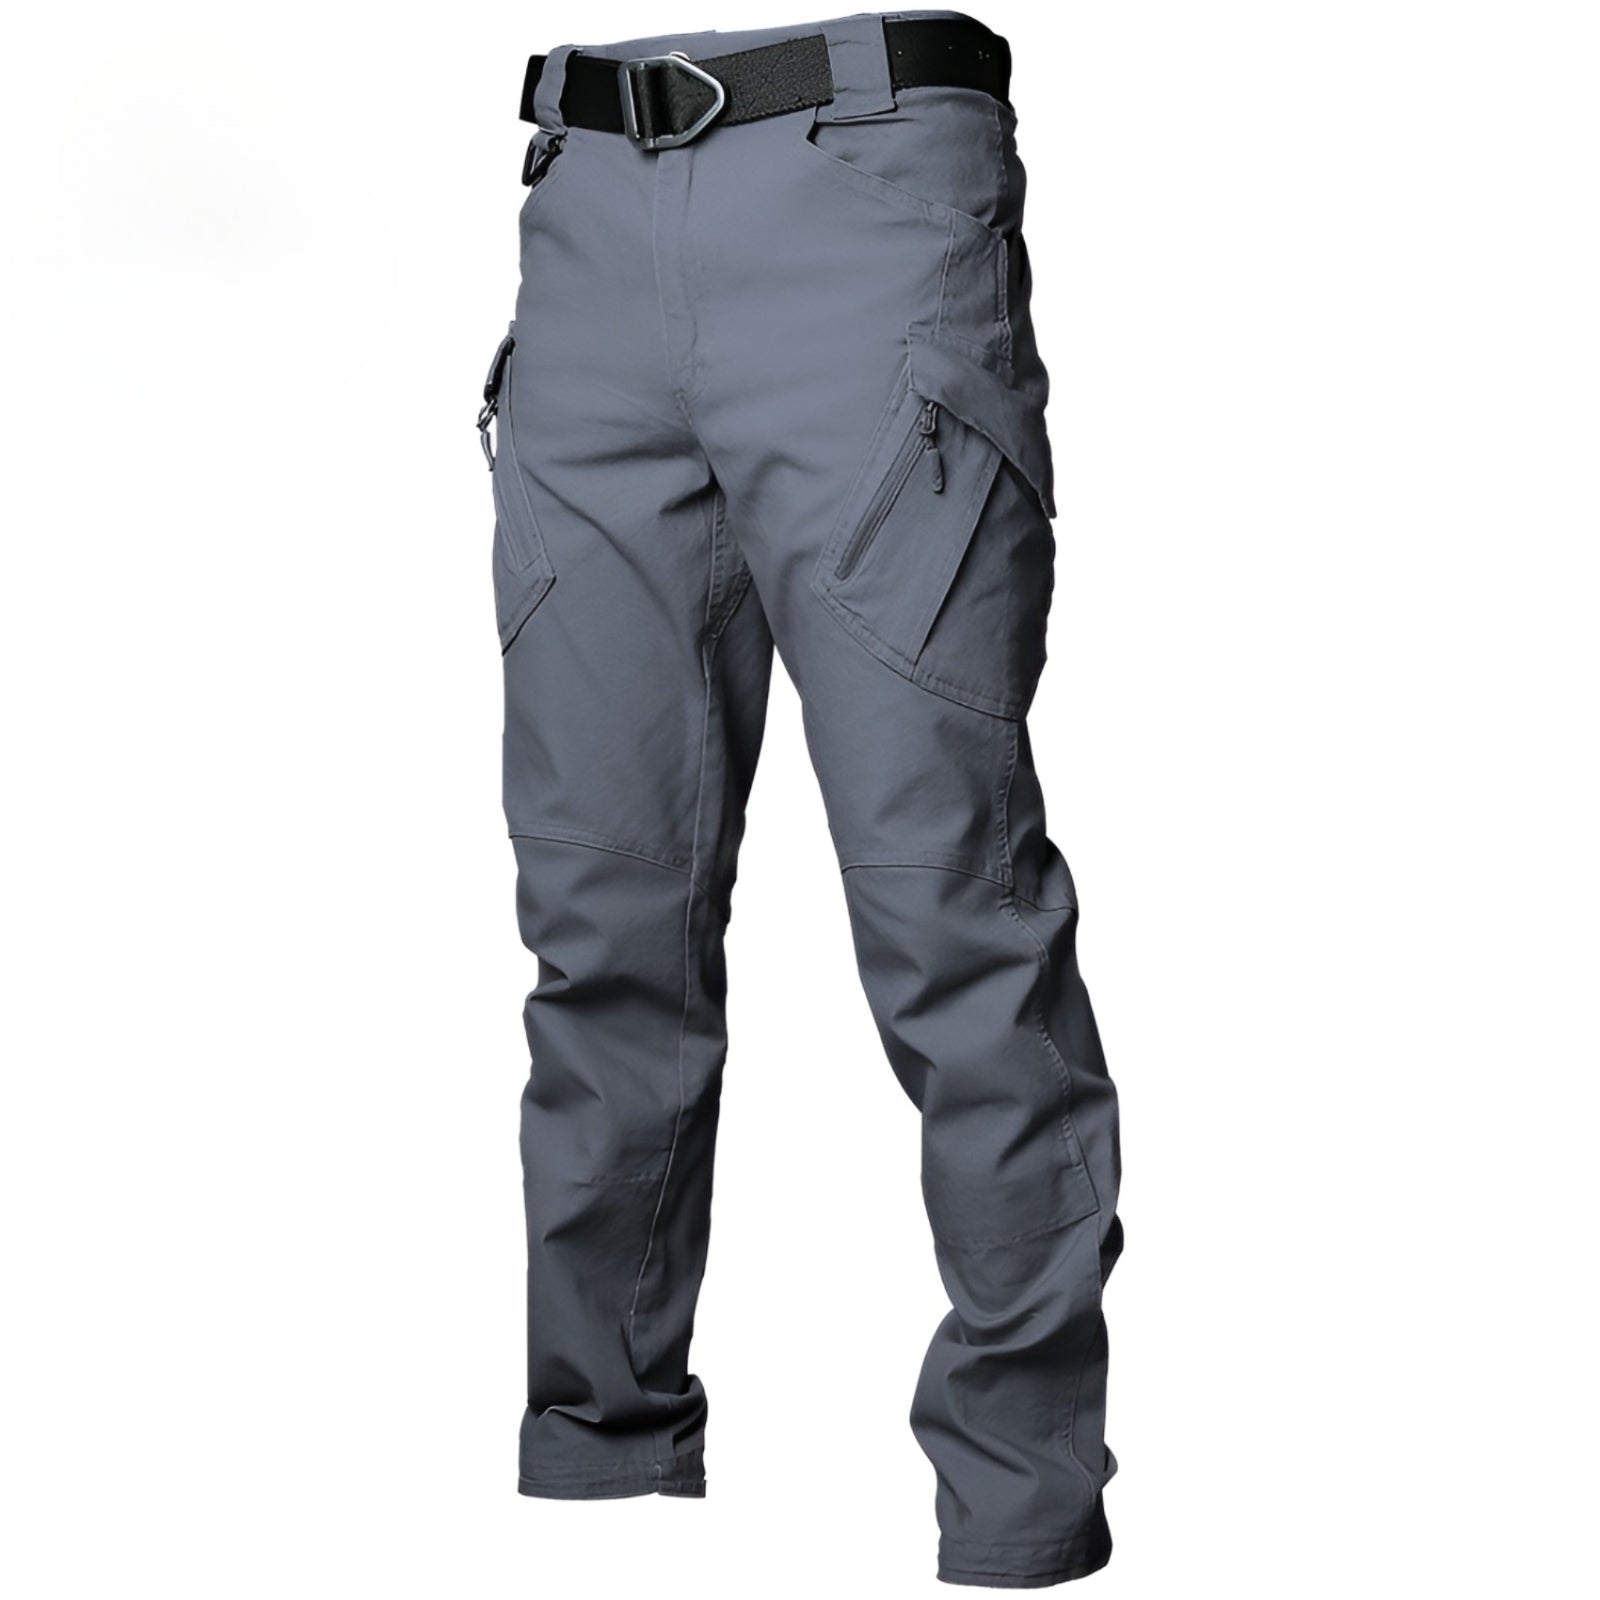 Soft shell pants for men that look as great as they feel – Snarky